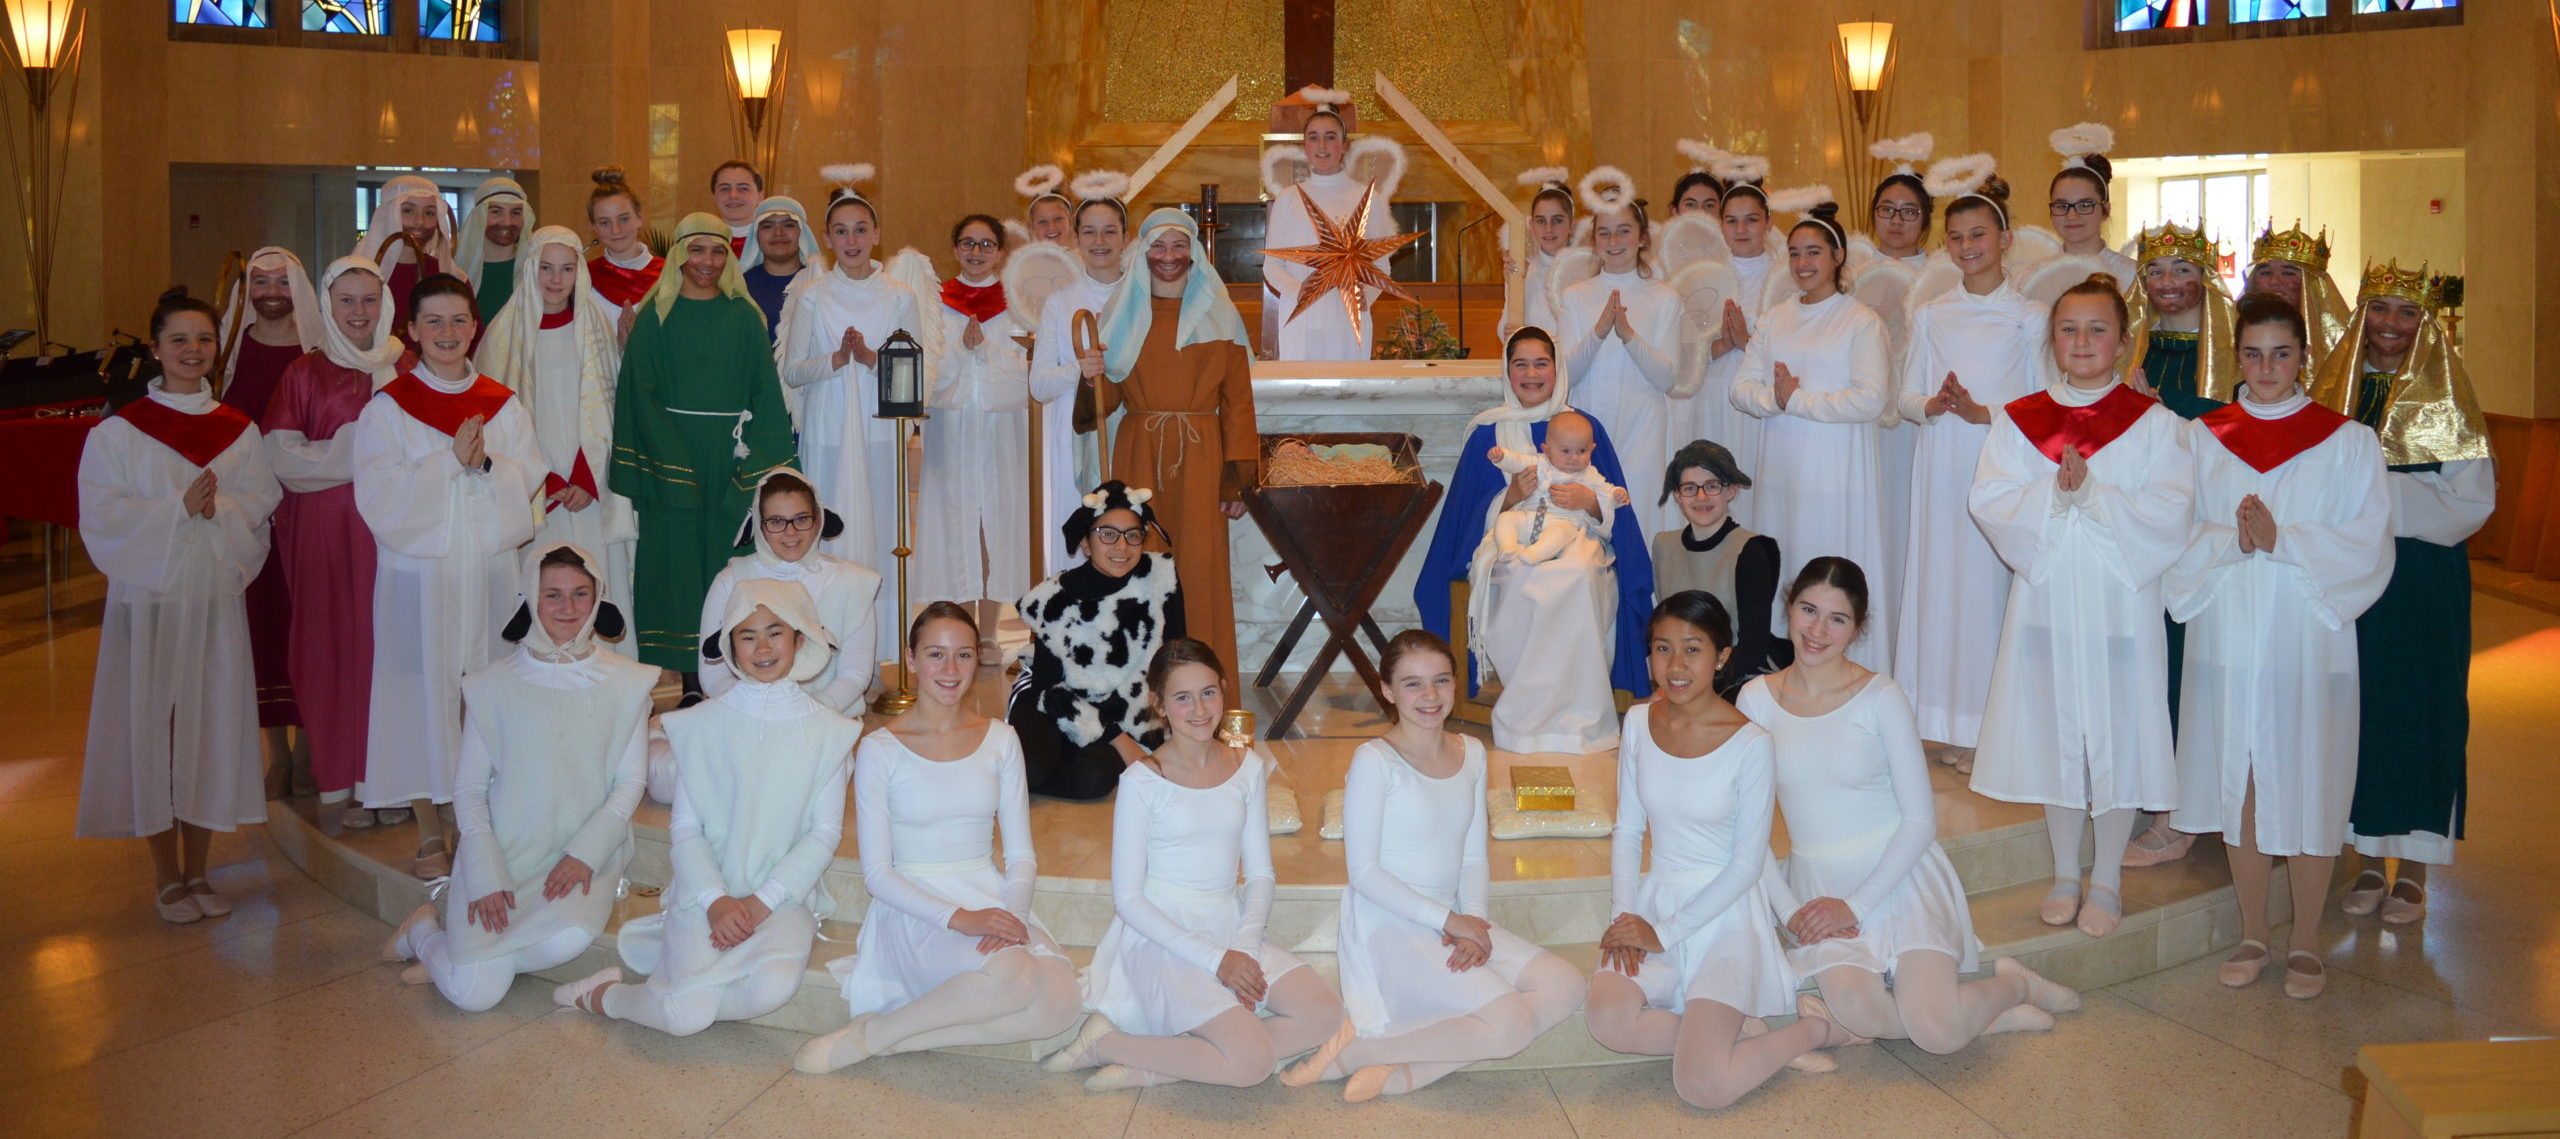 Christmas Pageant - an honored tradition at Villa Maria